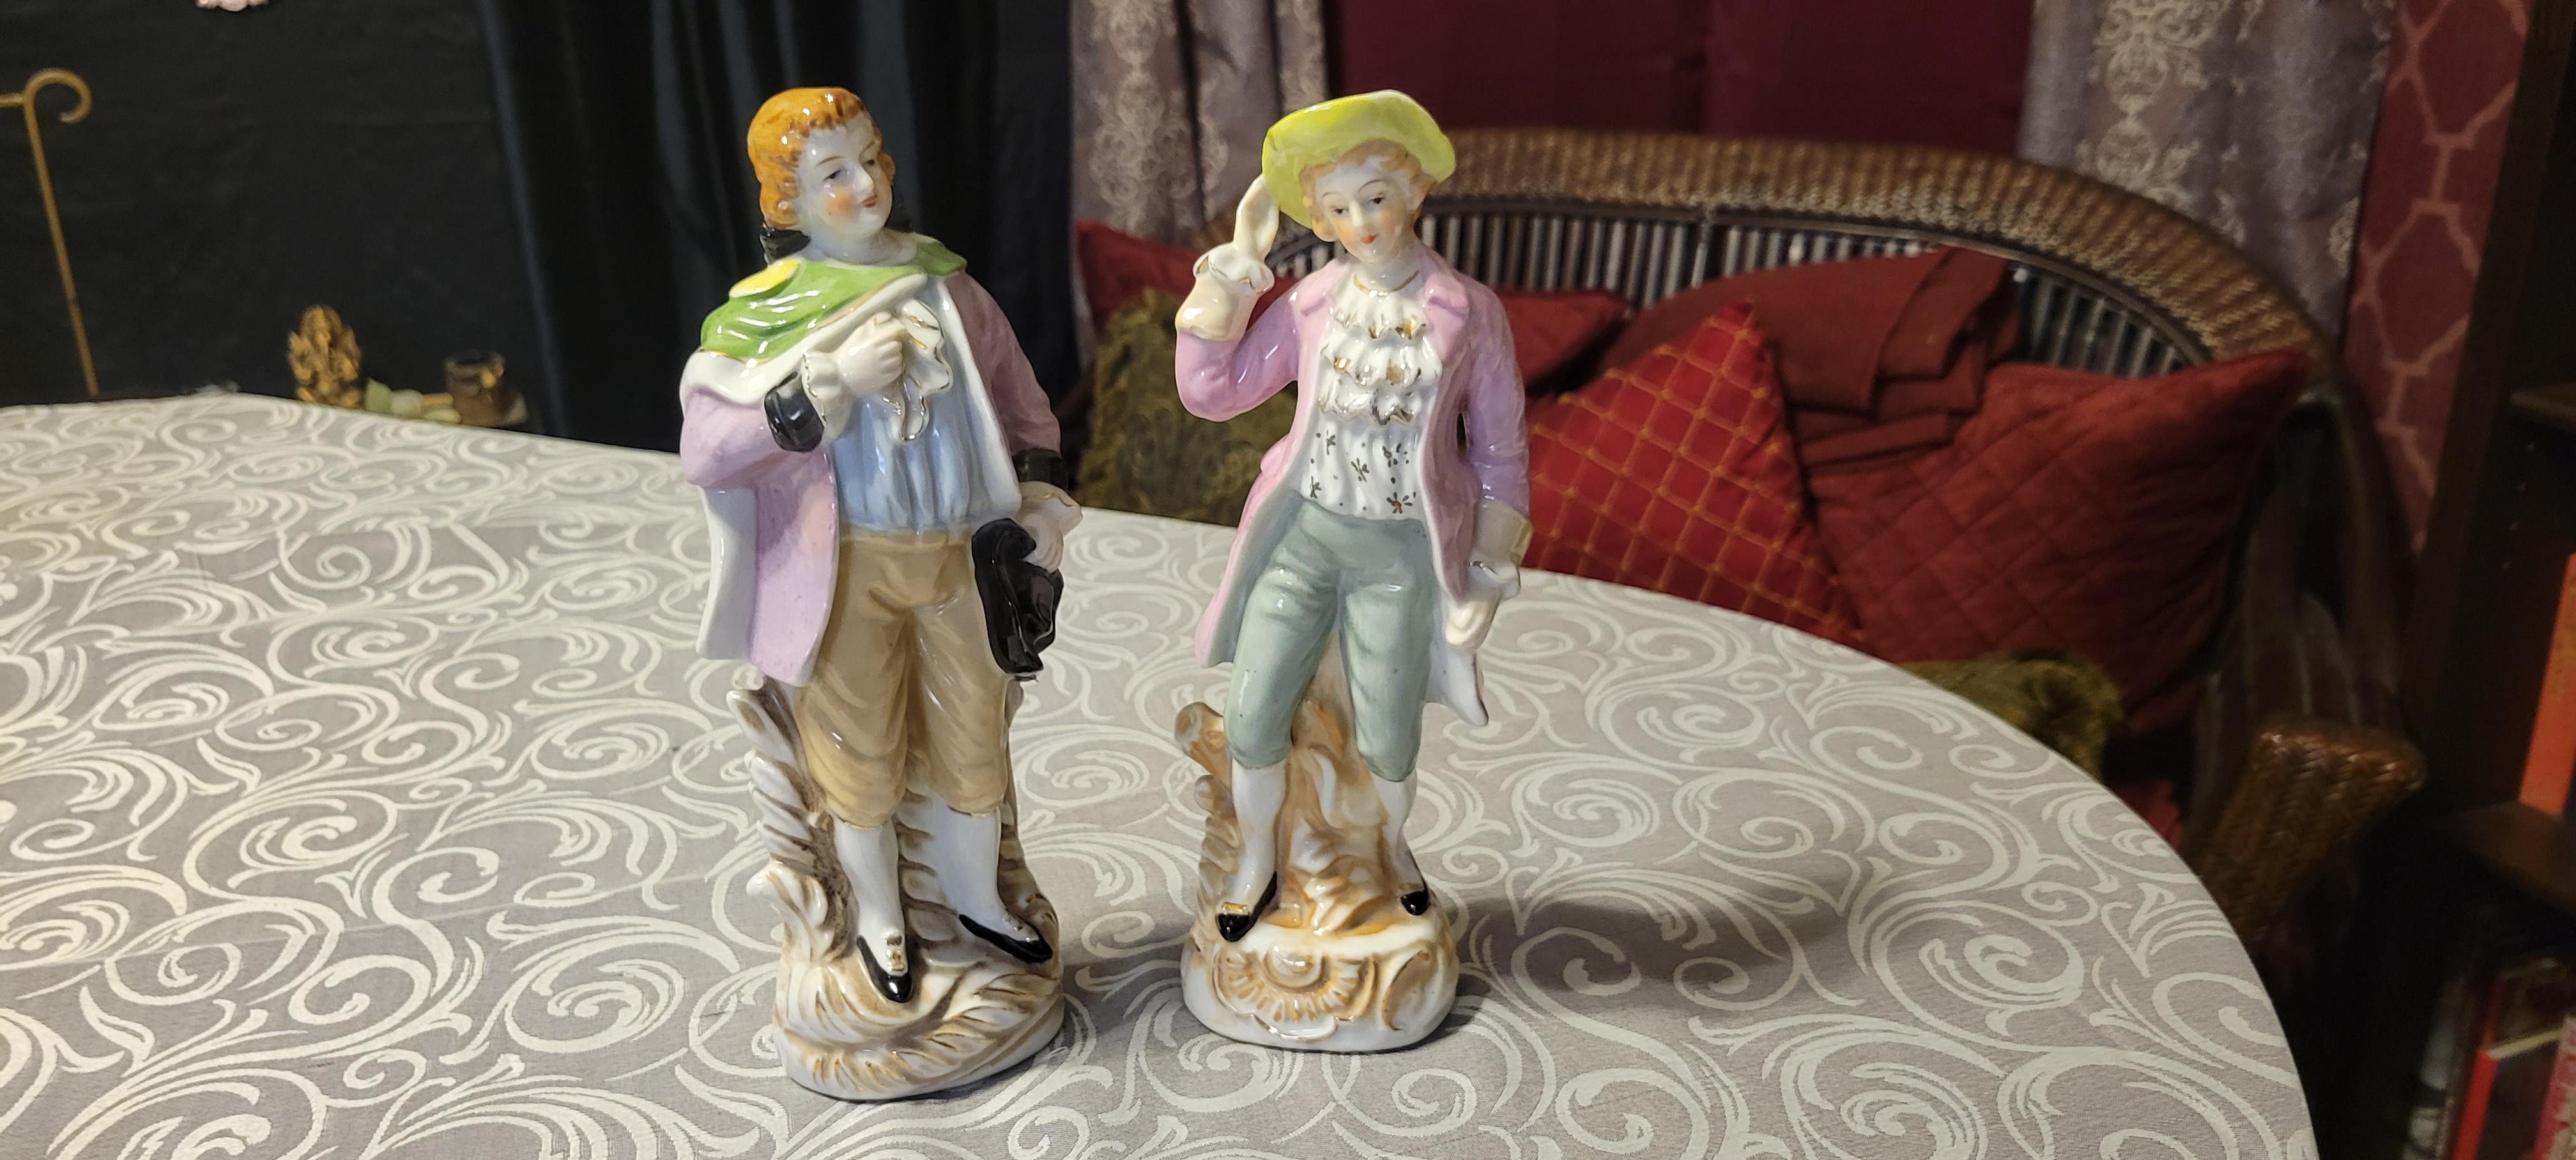 Vintage Japan-made Renaissance style porcelaine figurines.  Made between 1930-1950.
Hand-painted.
Each figurine is 10.5